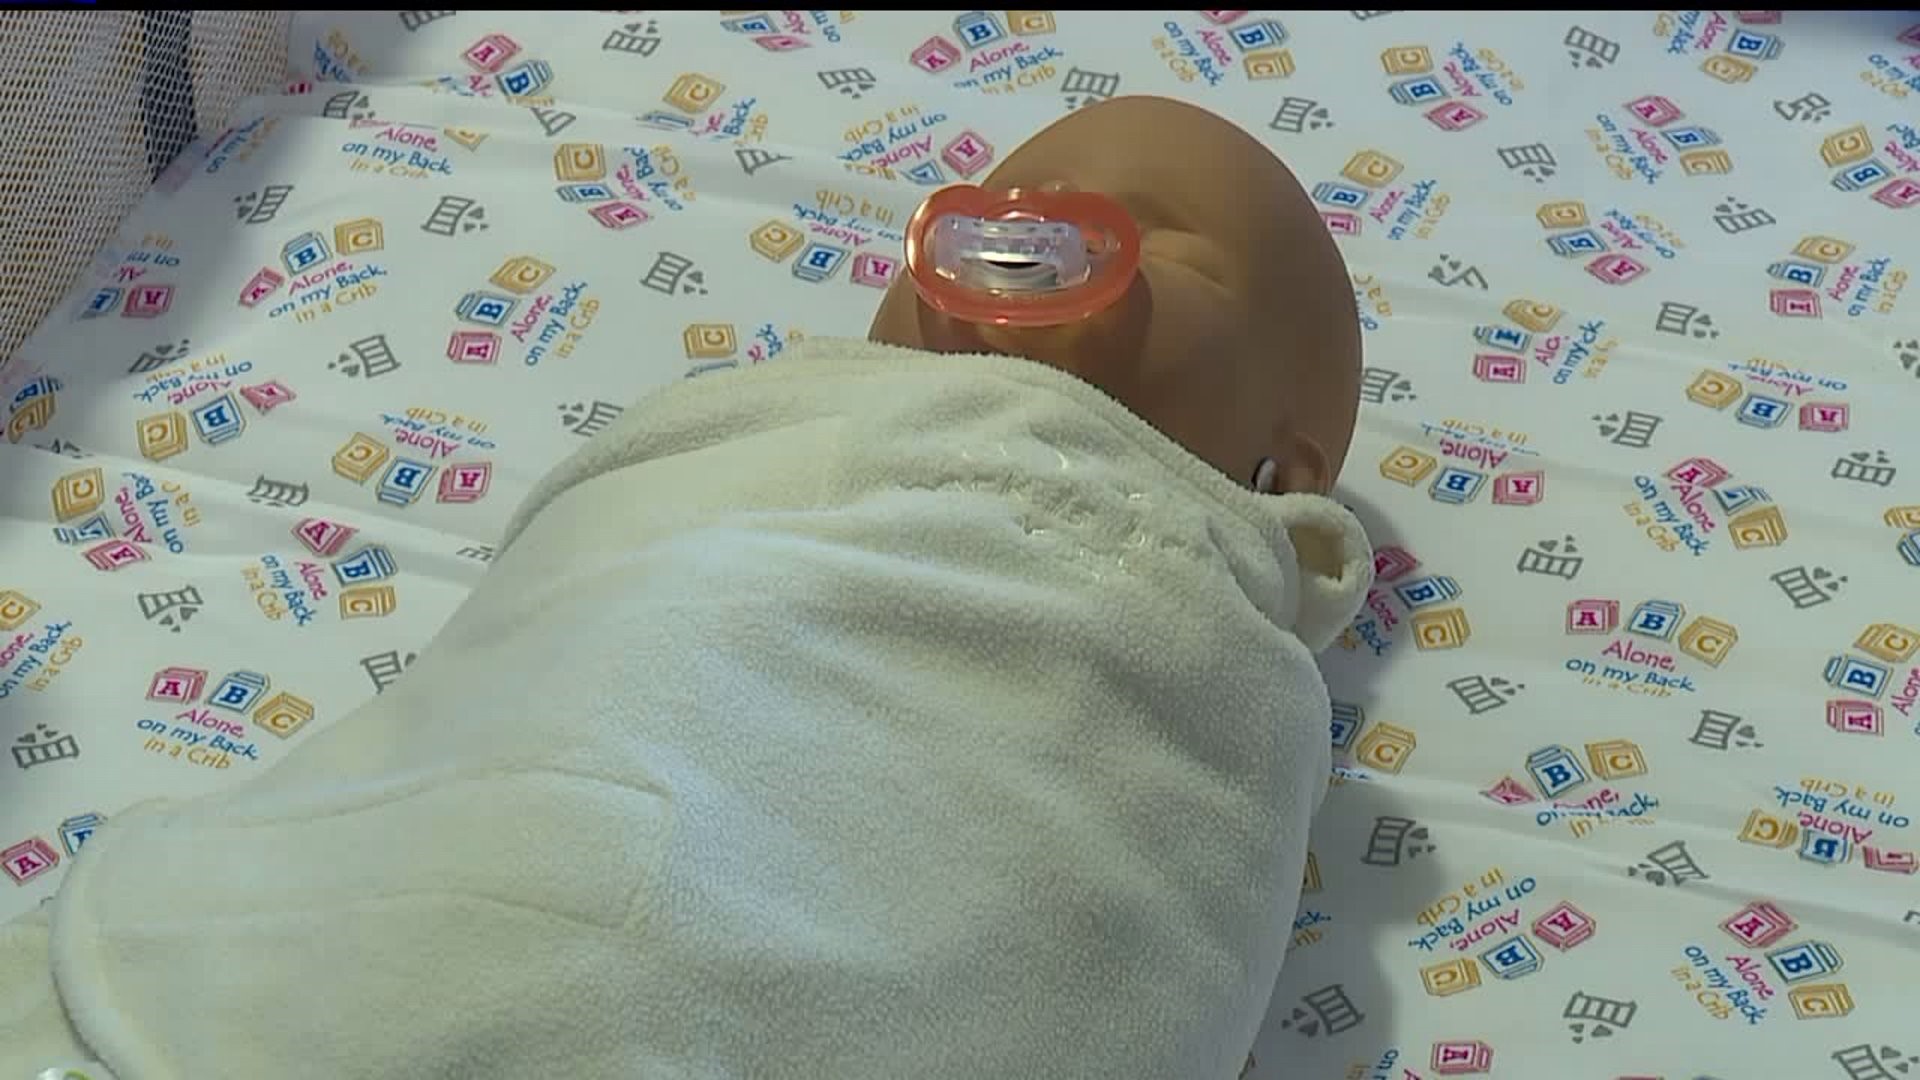 Local hospitals along with Dauphin County leaders are launching the Safe Sleep campaign to prevent infant deaths